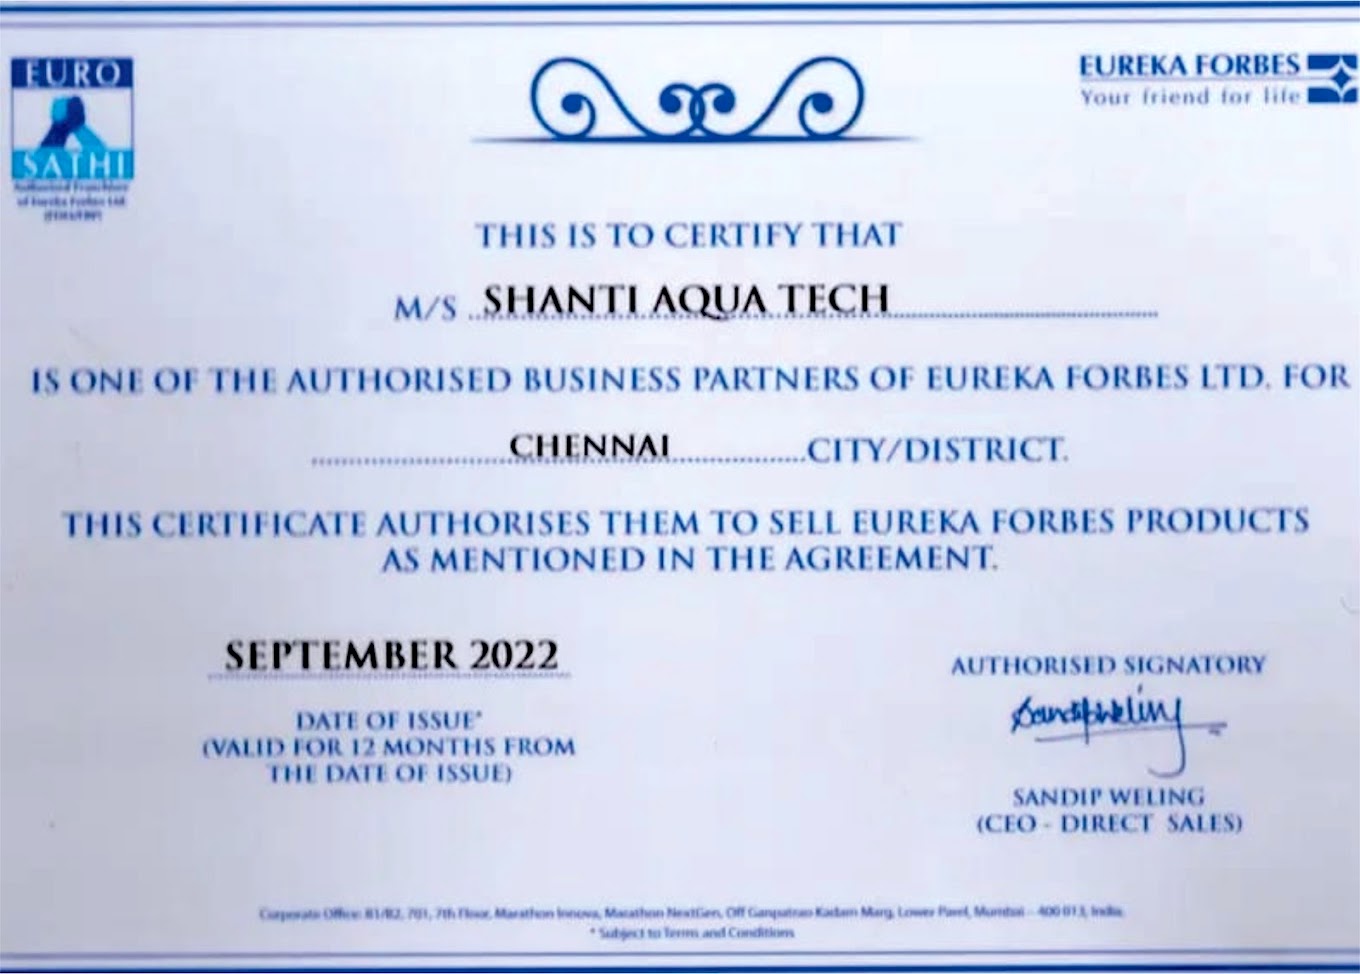 Shanthi AquaTech is Eureka Forbes Franchisee Business Partner. Issued Septembe 2022 till 2023